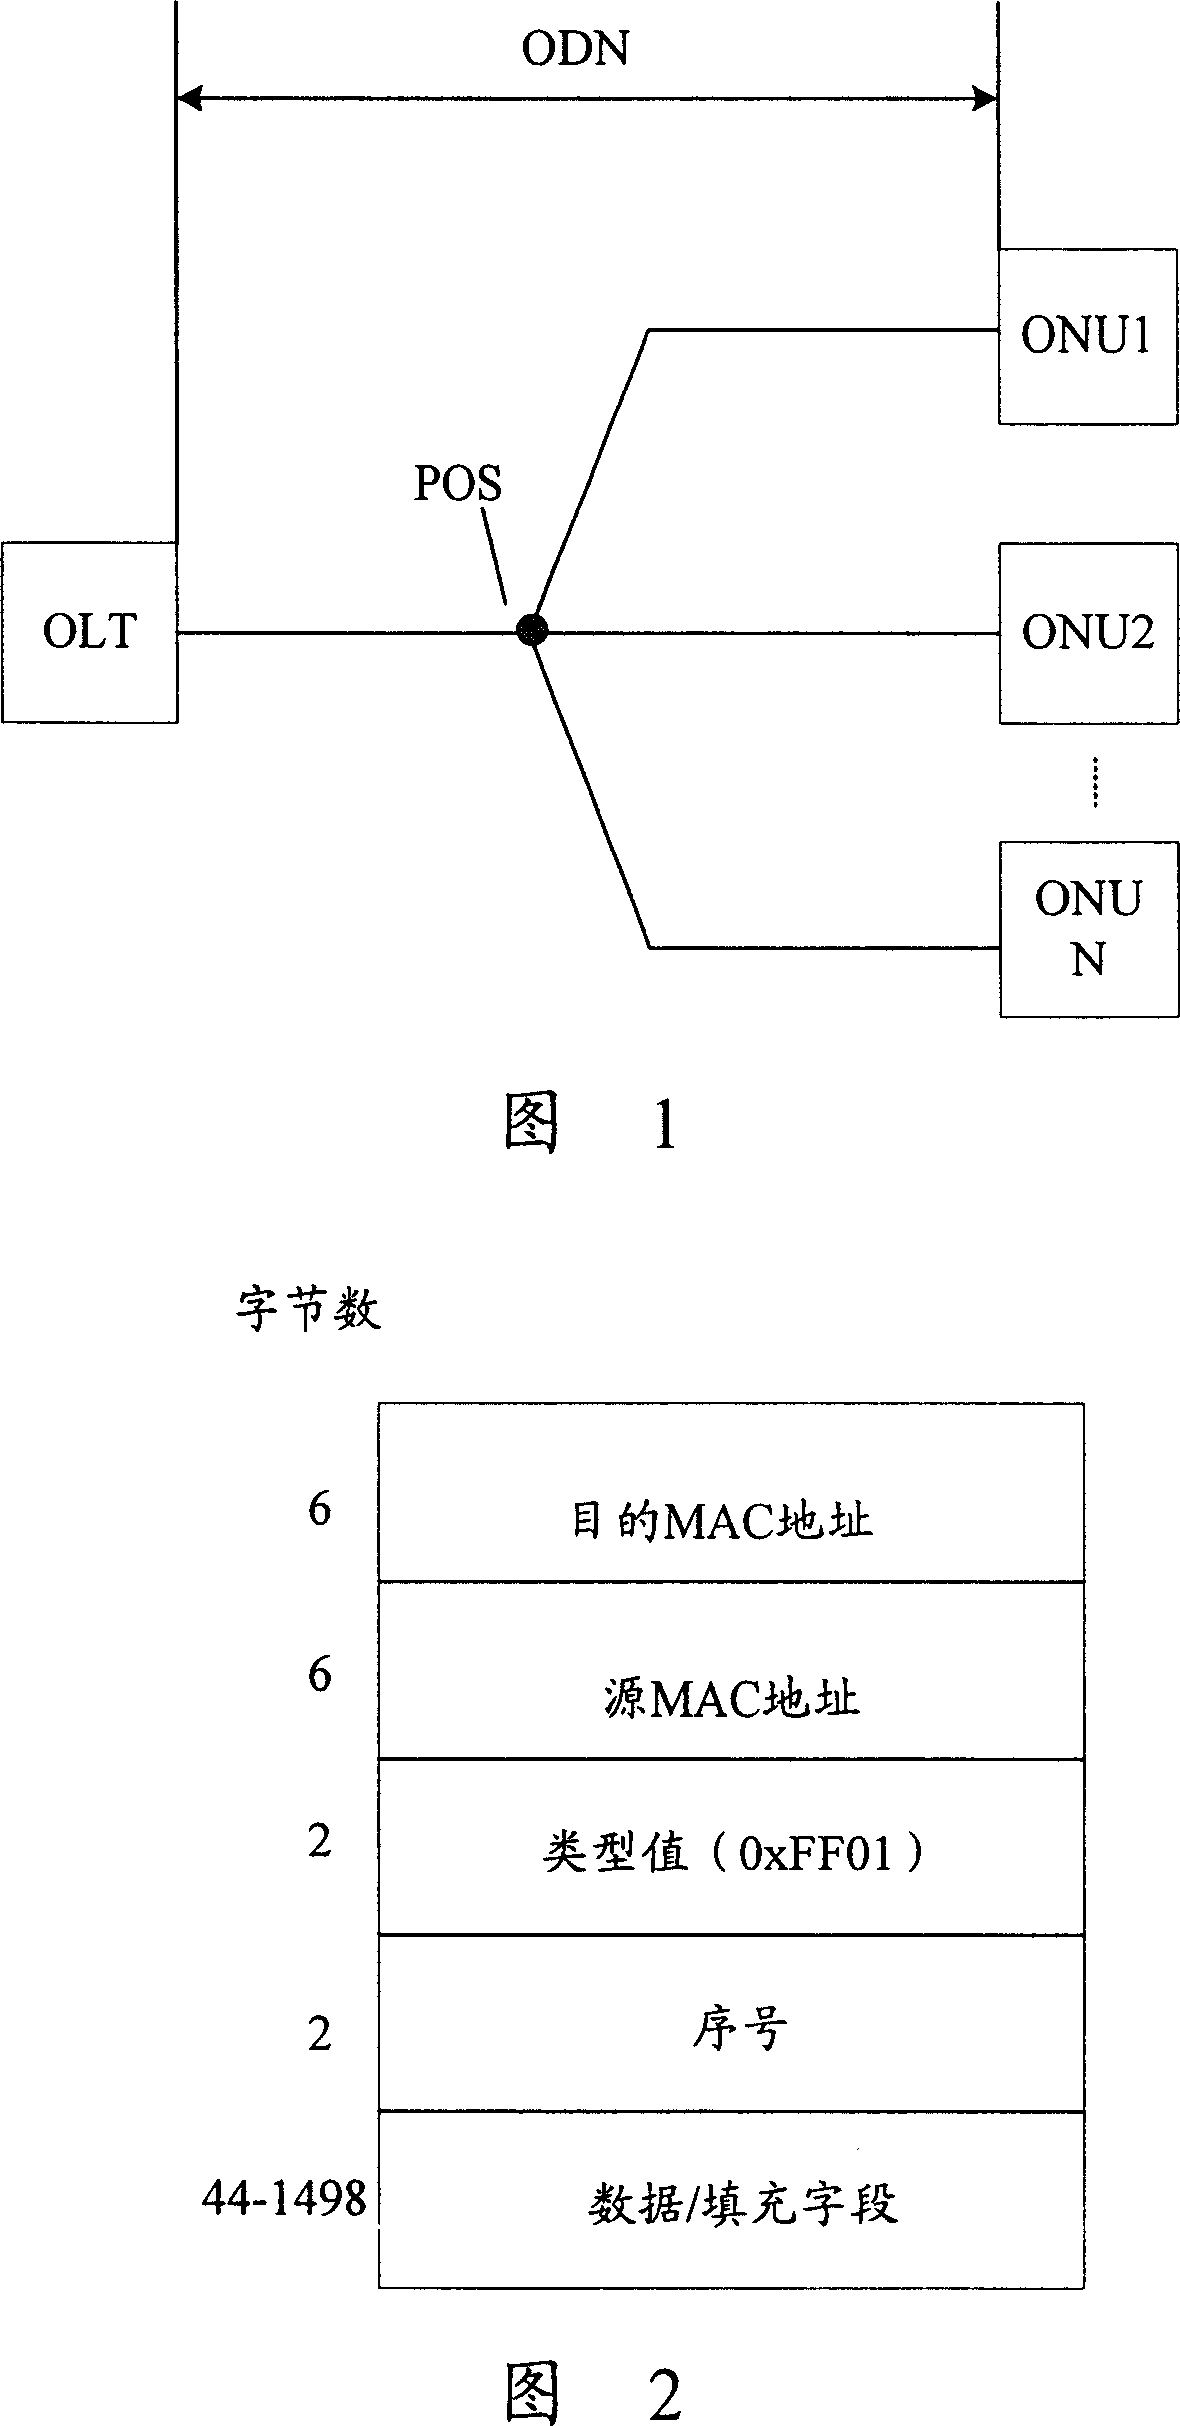 Method for transmitting upgrade software to optical network unit in Ethernet passive optical network